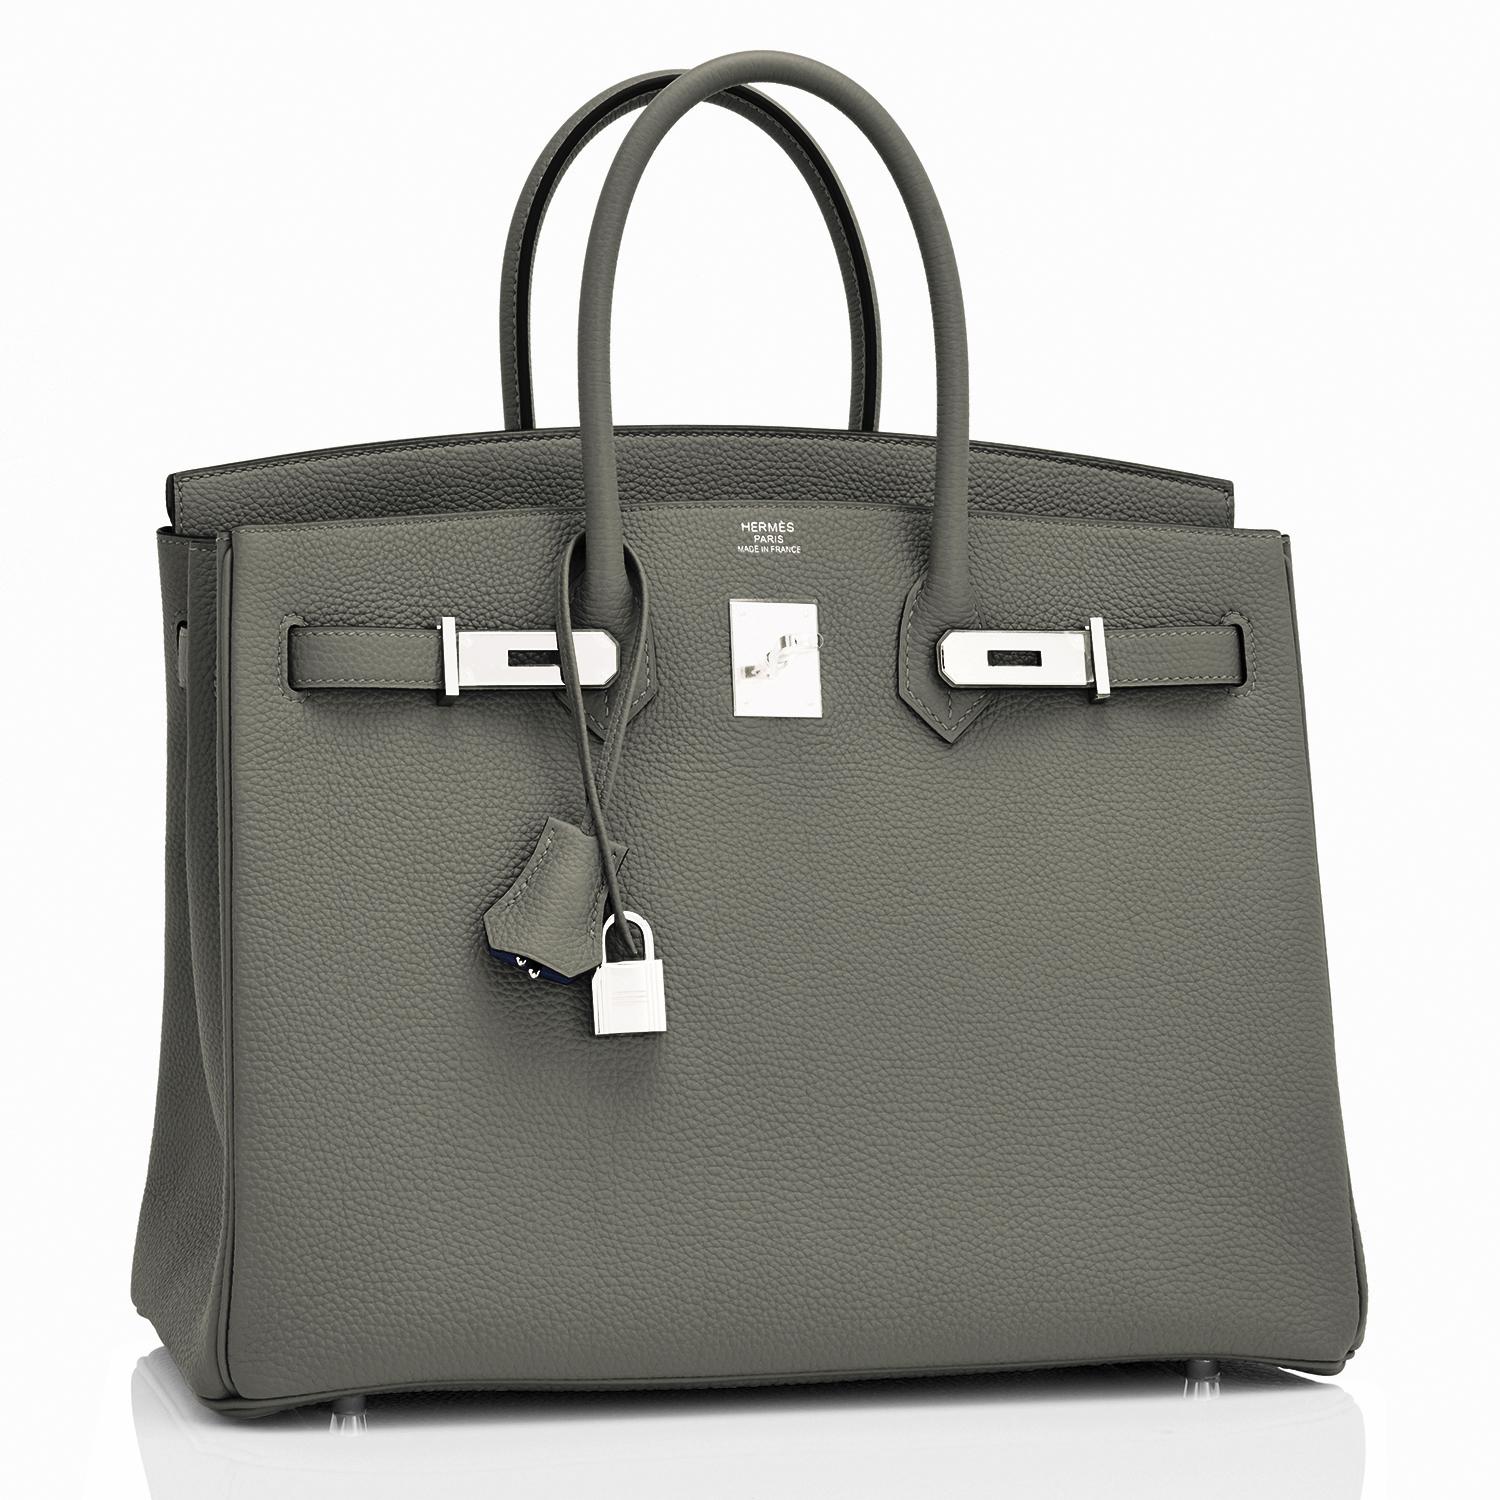 Hermes Birkin 35cm Vert de Gris Green Grey Togo Palladium Bag Y Stamp, 2020
Rare and gorgeous green-gray color perfect for fall!
Brand New in Box. Store Fresh. Pristine Condition (with plastic on hardware). 
Comes with lock, keys, clochette,